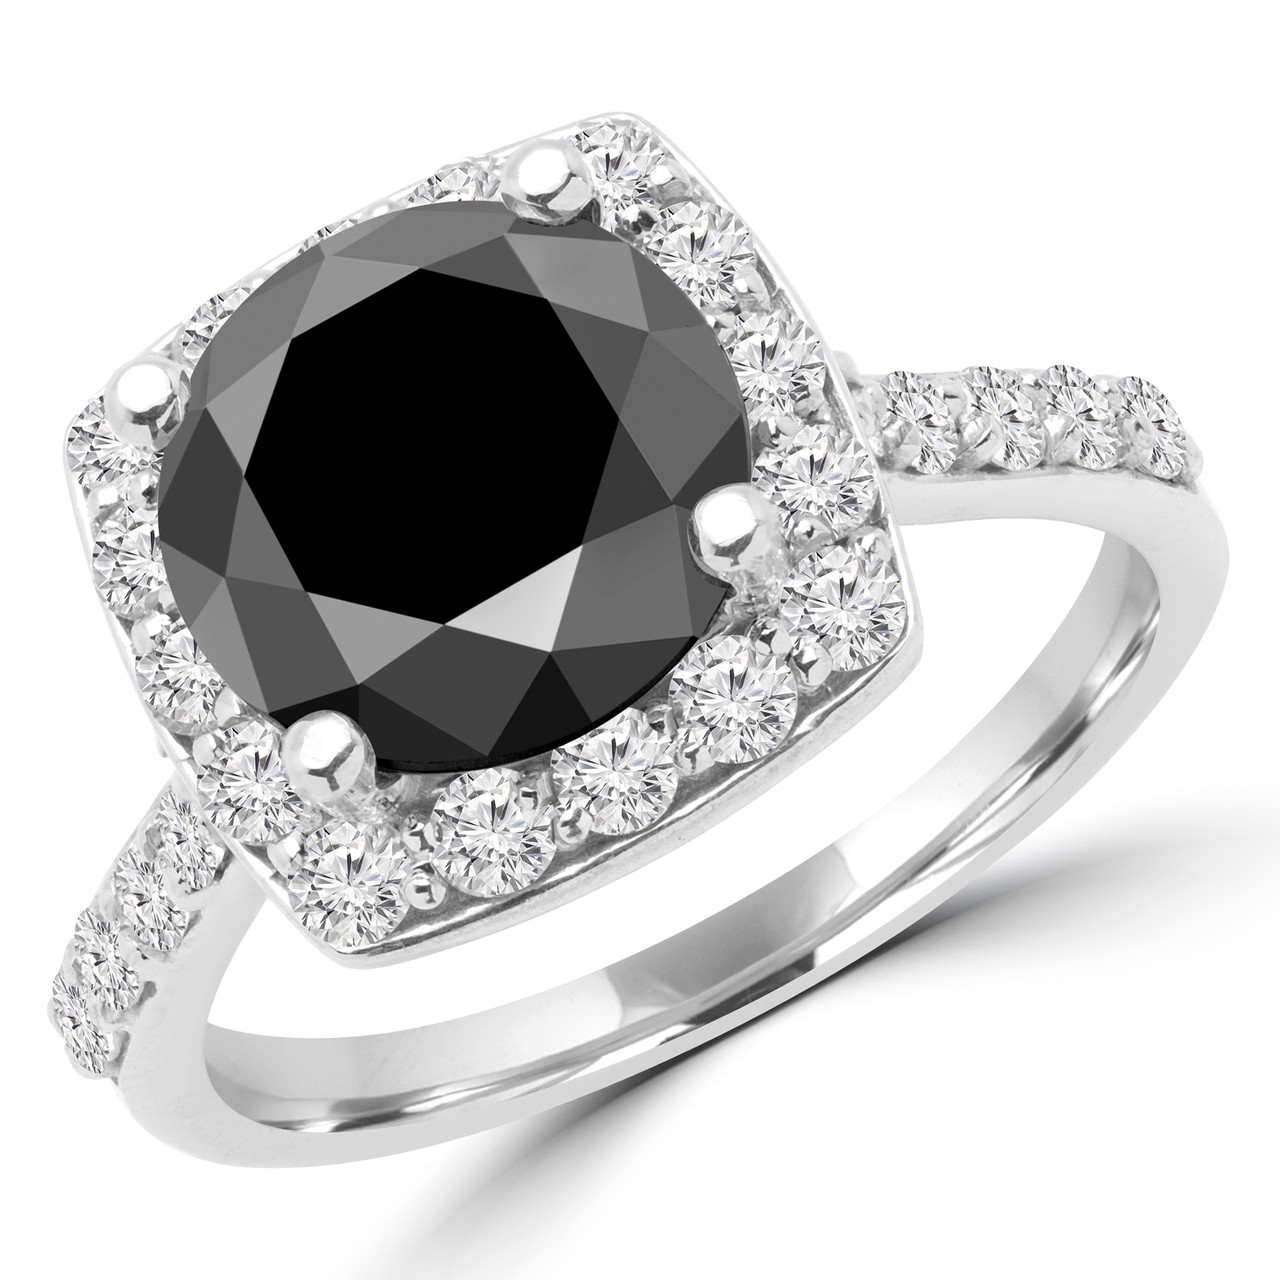 Round Cut Black Diamond Halo Engagement Ring with Accents